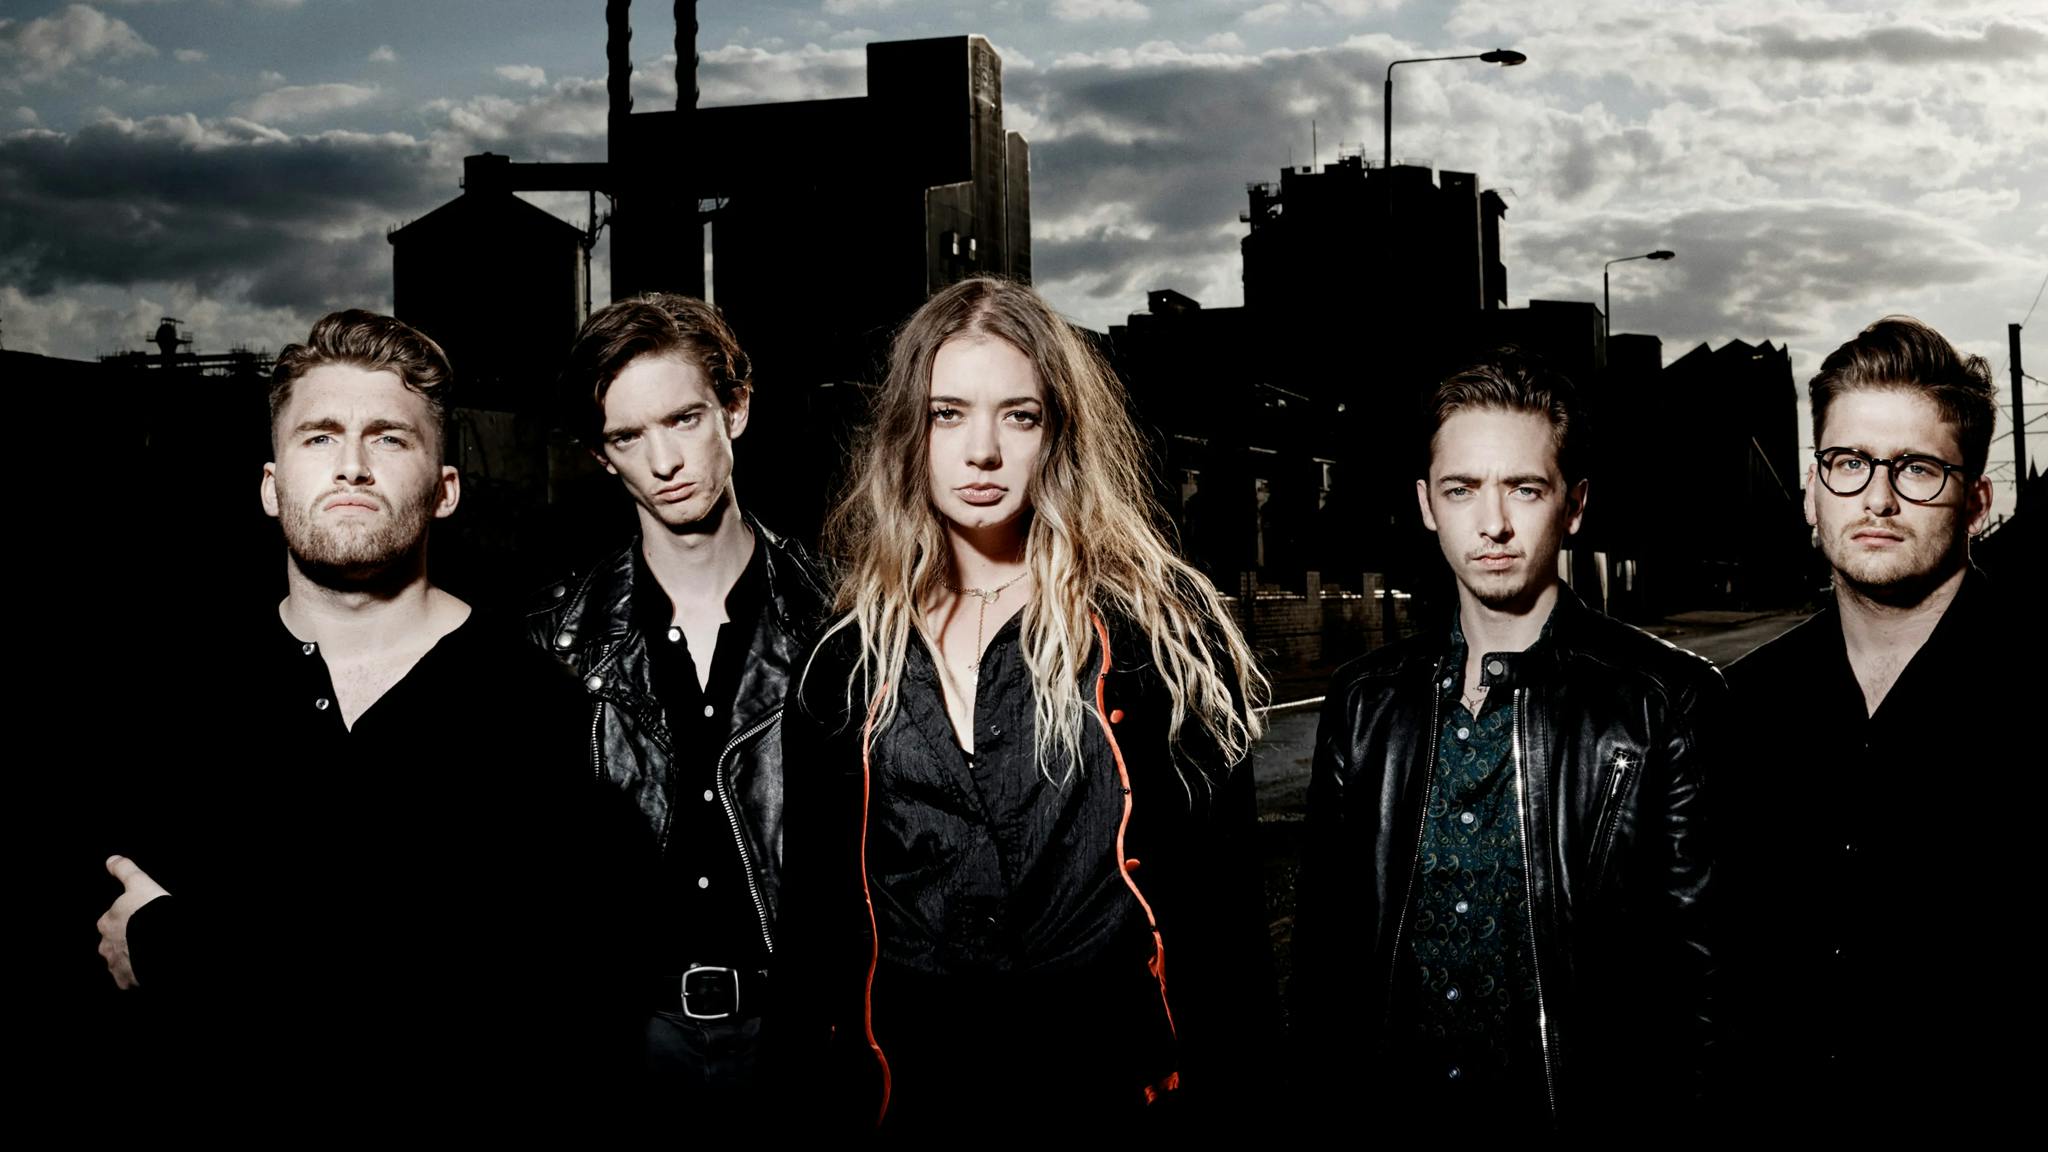 Marmozets are finally teasing new music